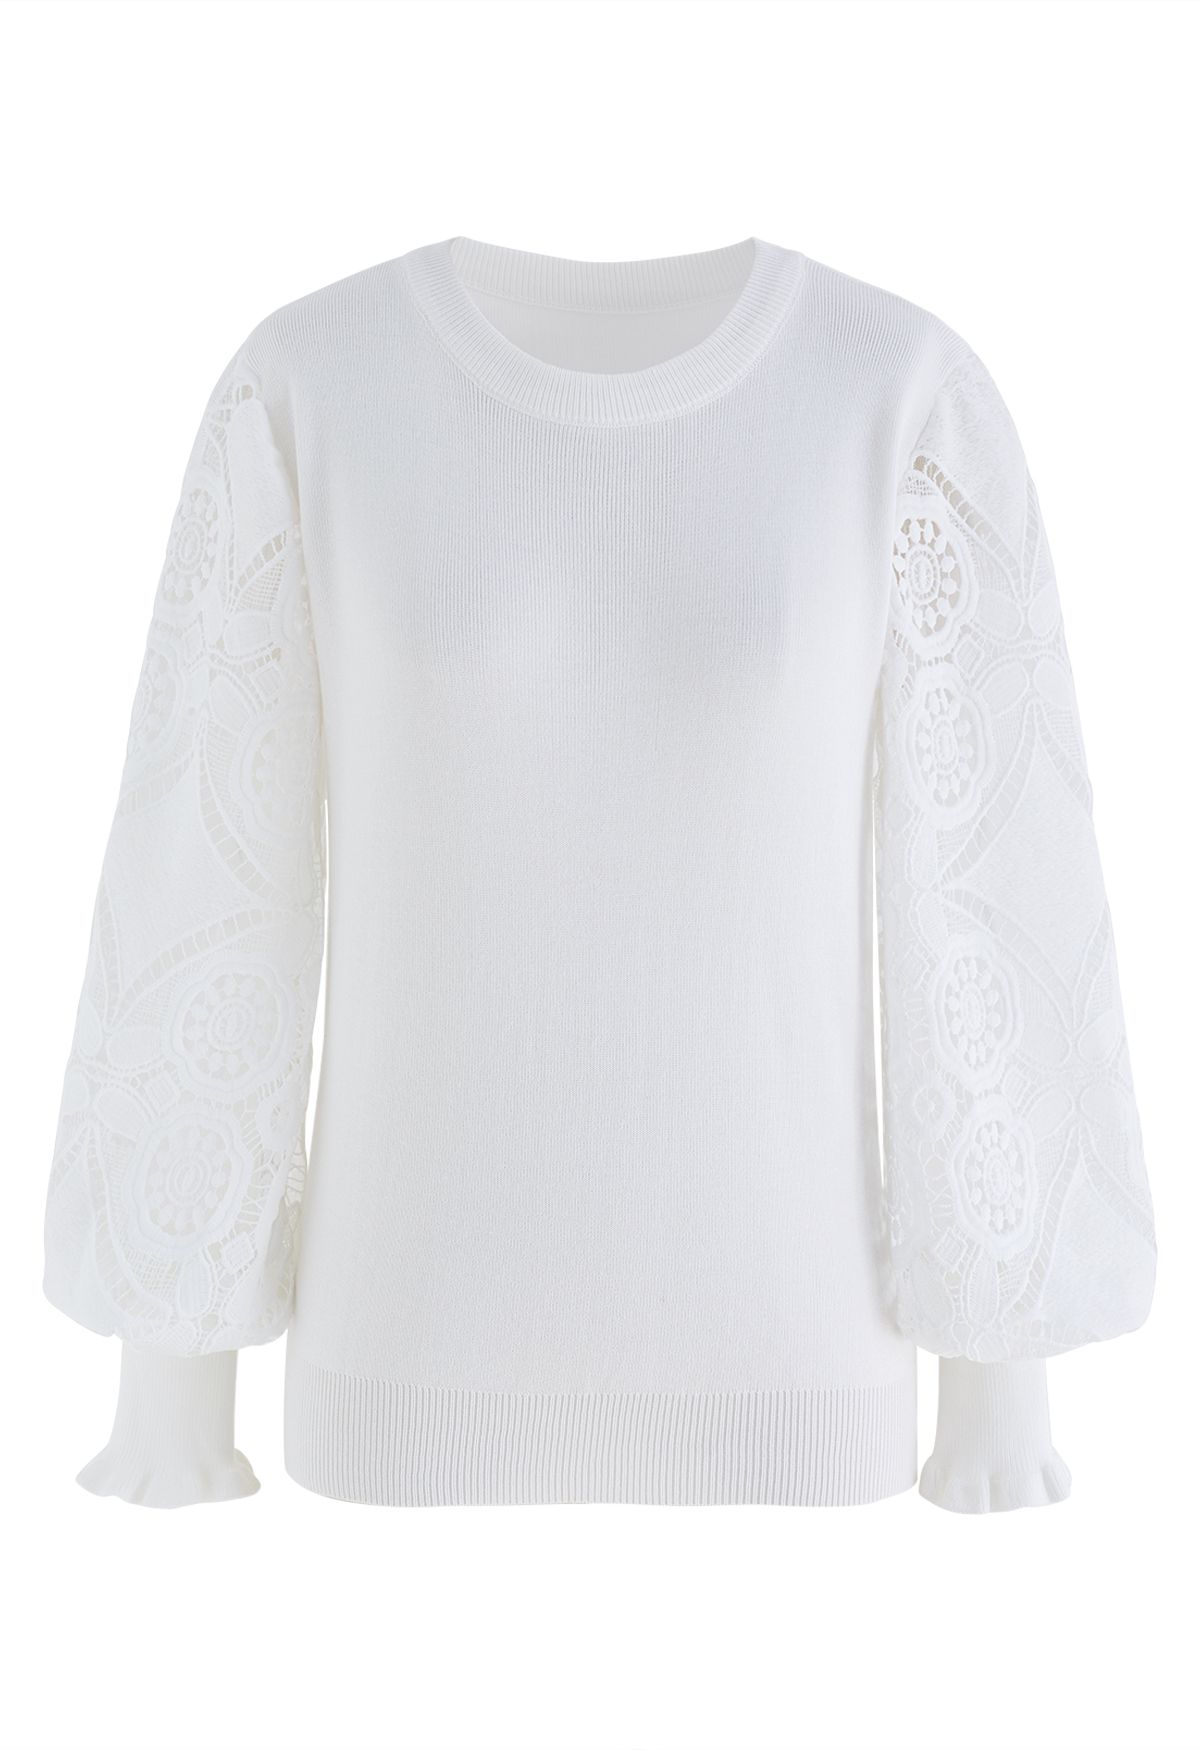 Floral Crochet Sleeve Knit Top in White